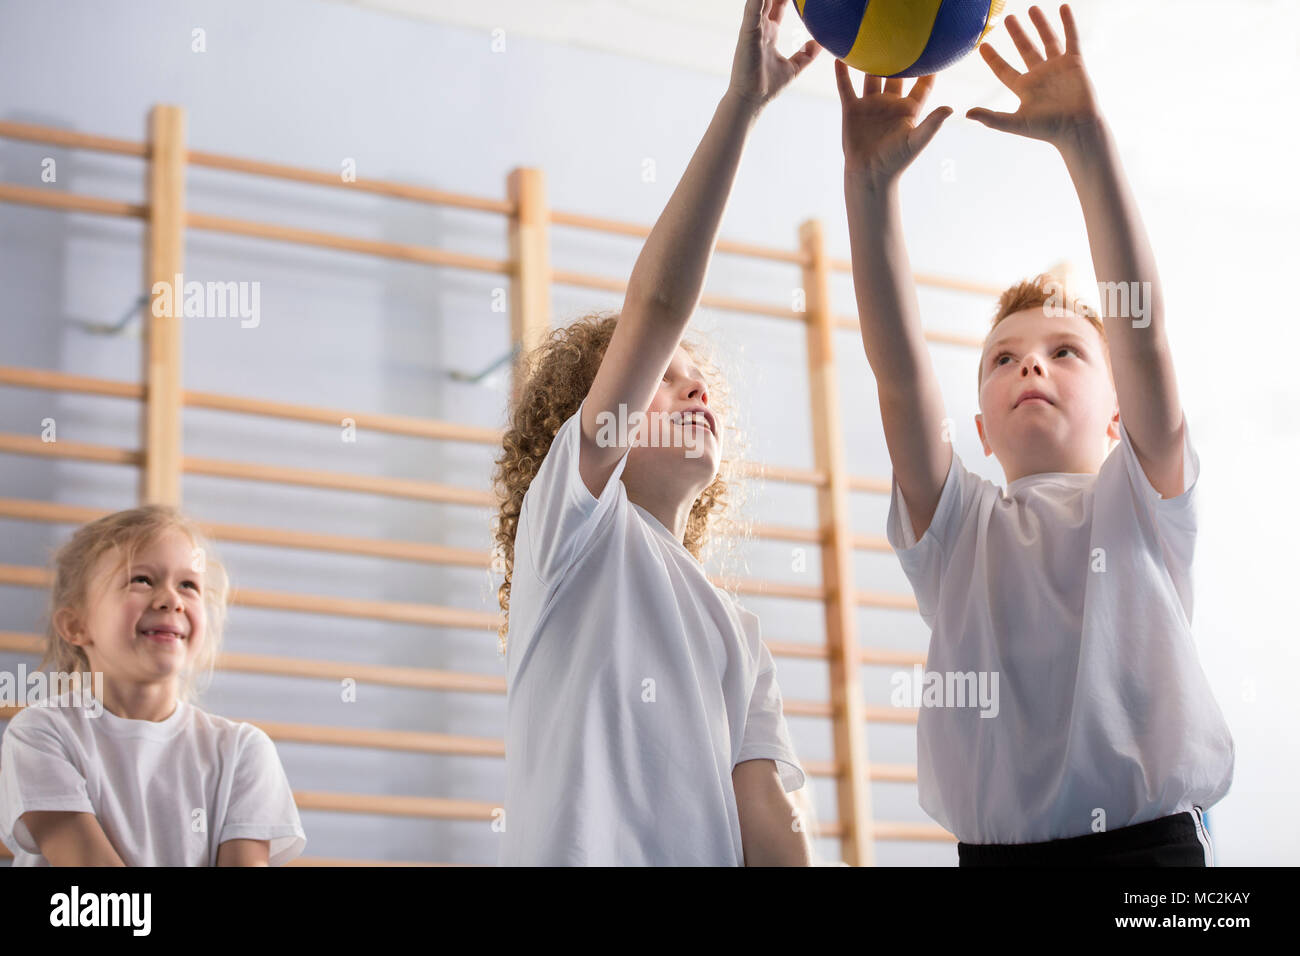 Low angle of happy boys playing volleyball during sports activities at school Stock Photo